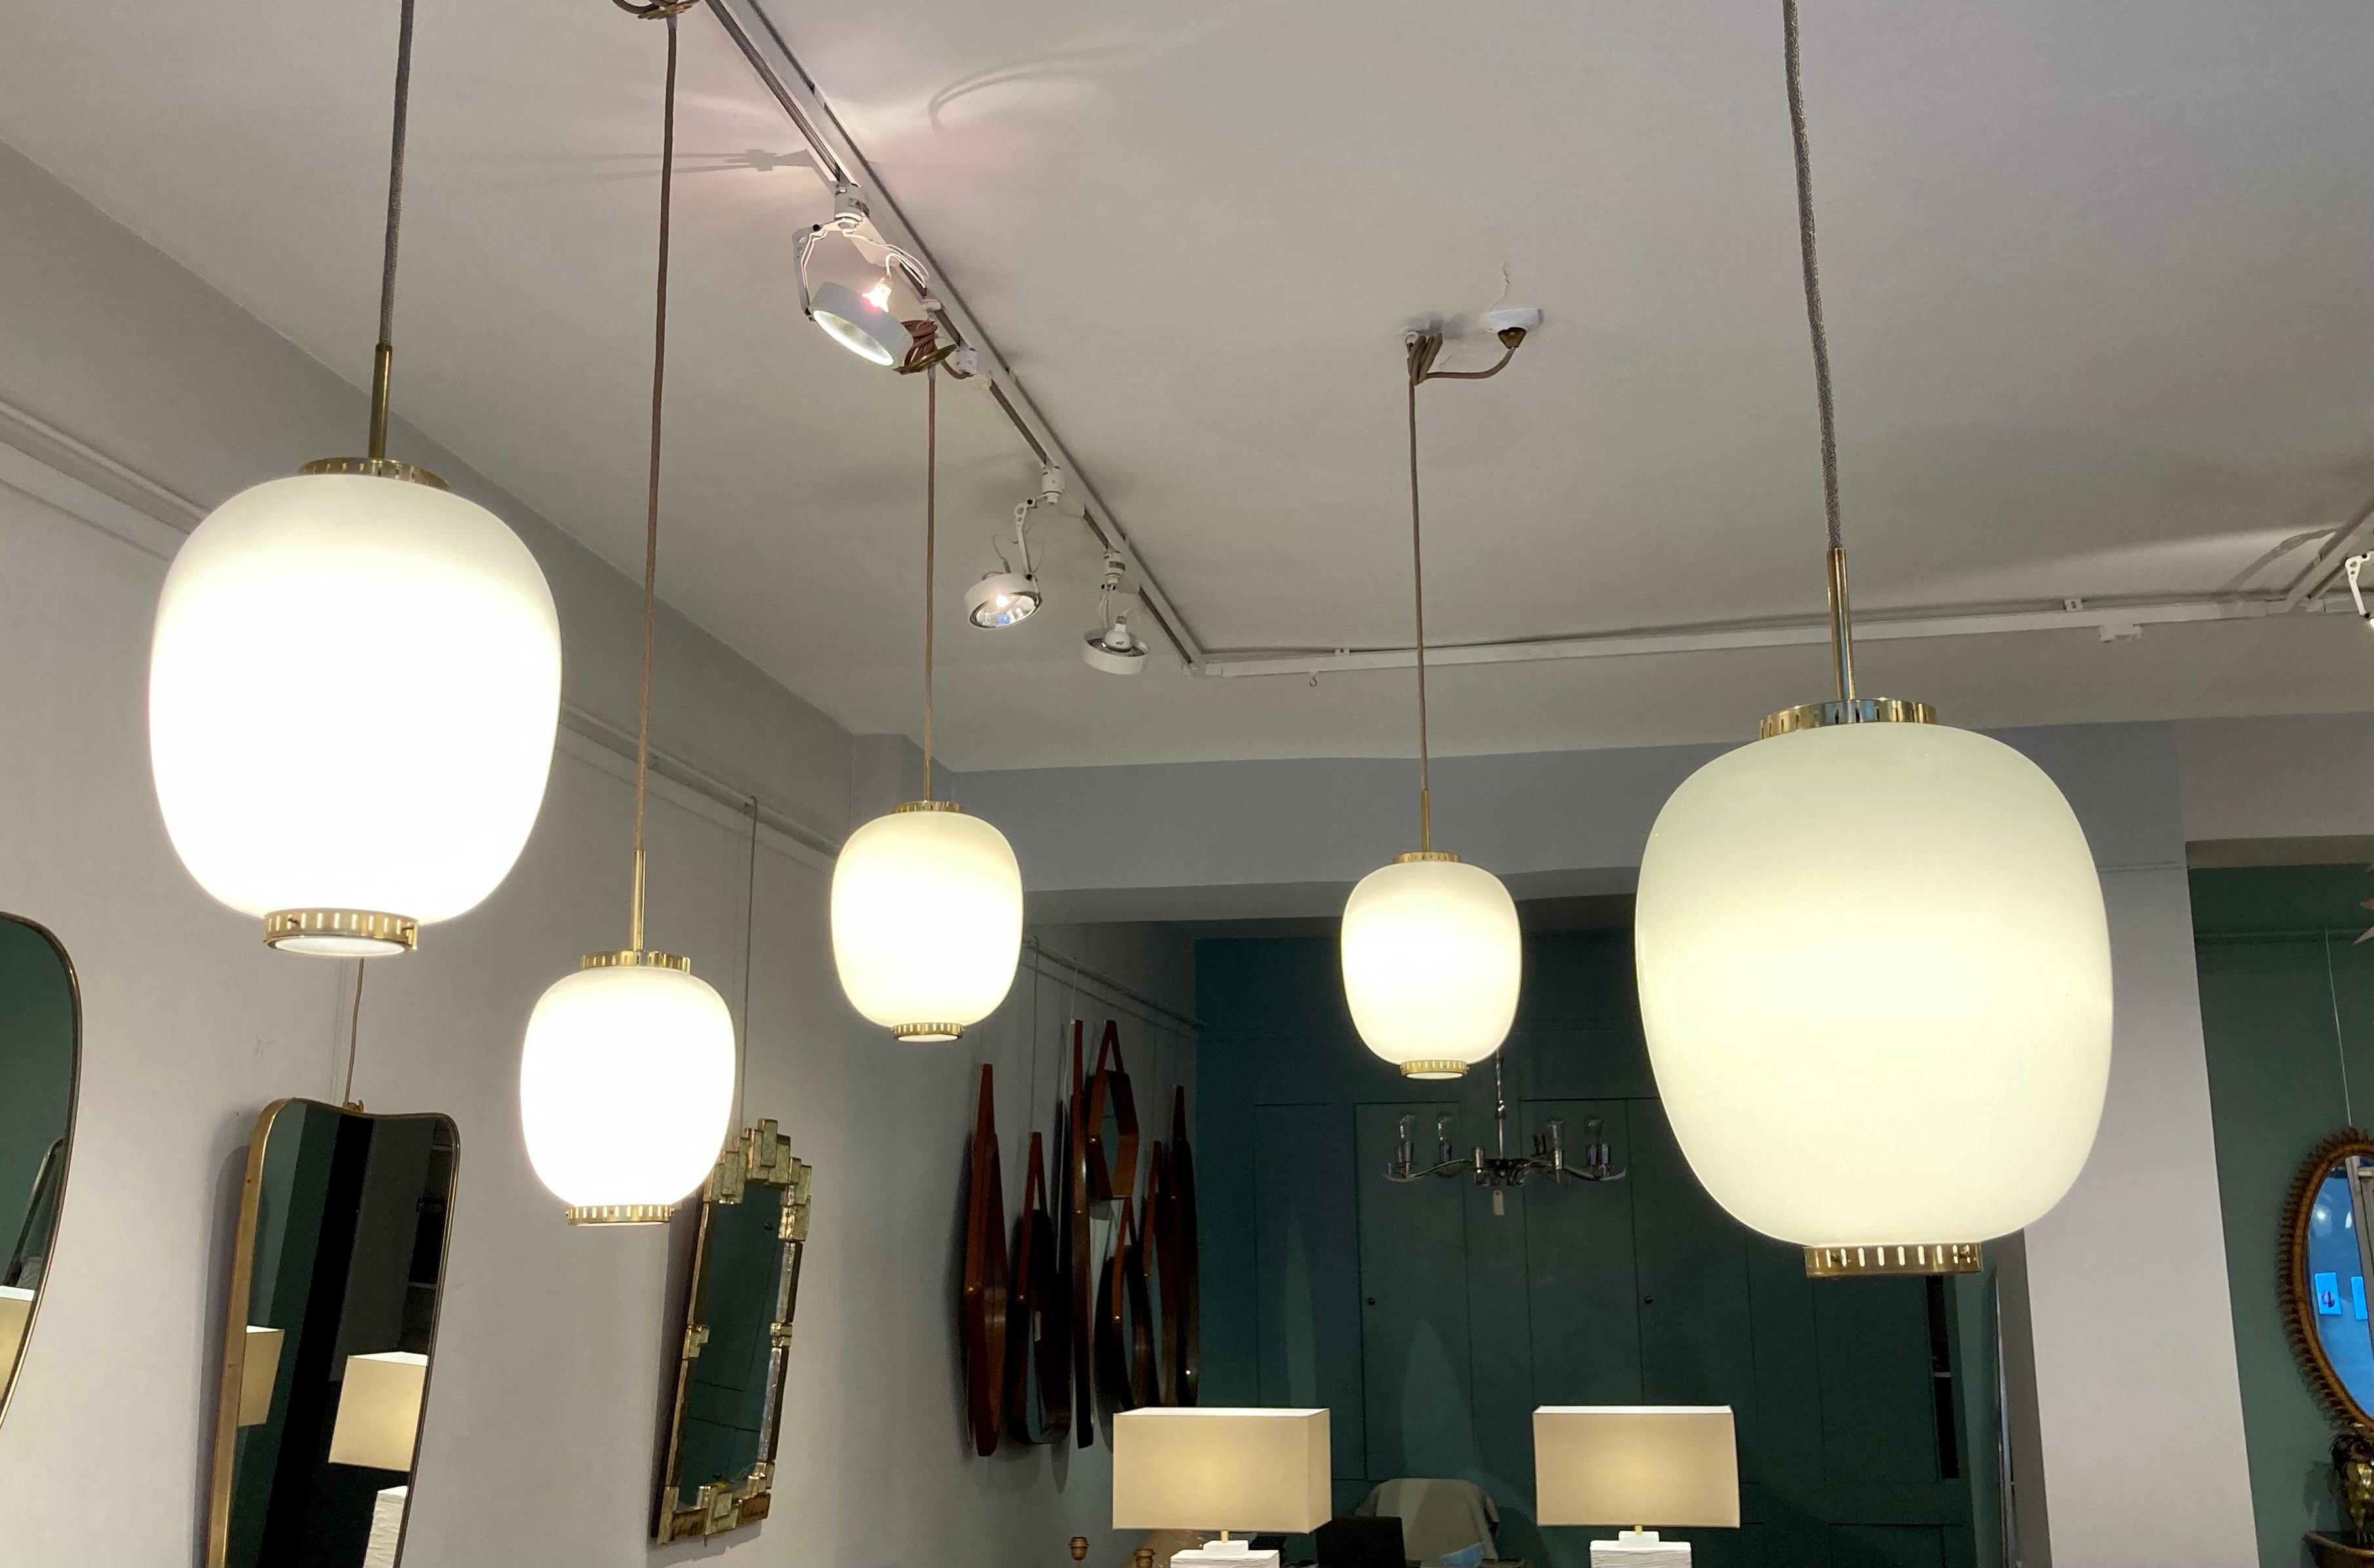 Collection of 5 opaline glass and brass ceiling fixtures.
See dimensions below 
Designed by Bent Karlby for Lyfa. 
Denmark, late 1950s.

Dimensions: (Height of the opaline + top and bottom brass disc)
Medium (4 items available) H 11.8 in. (30 cm), D